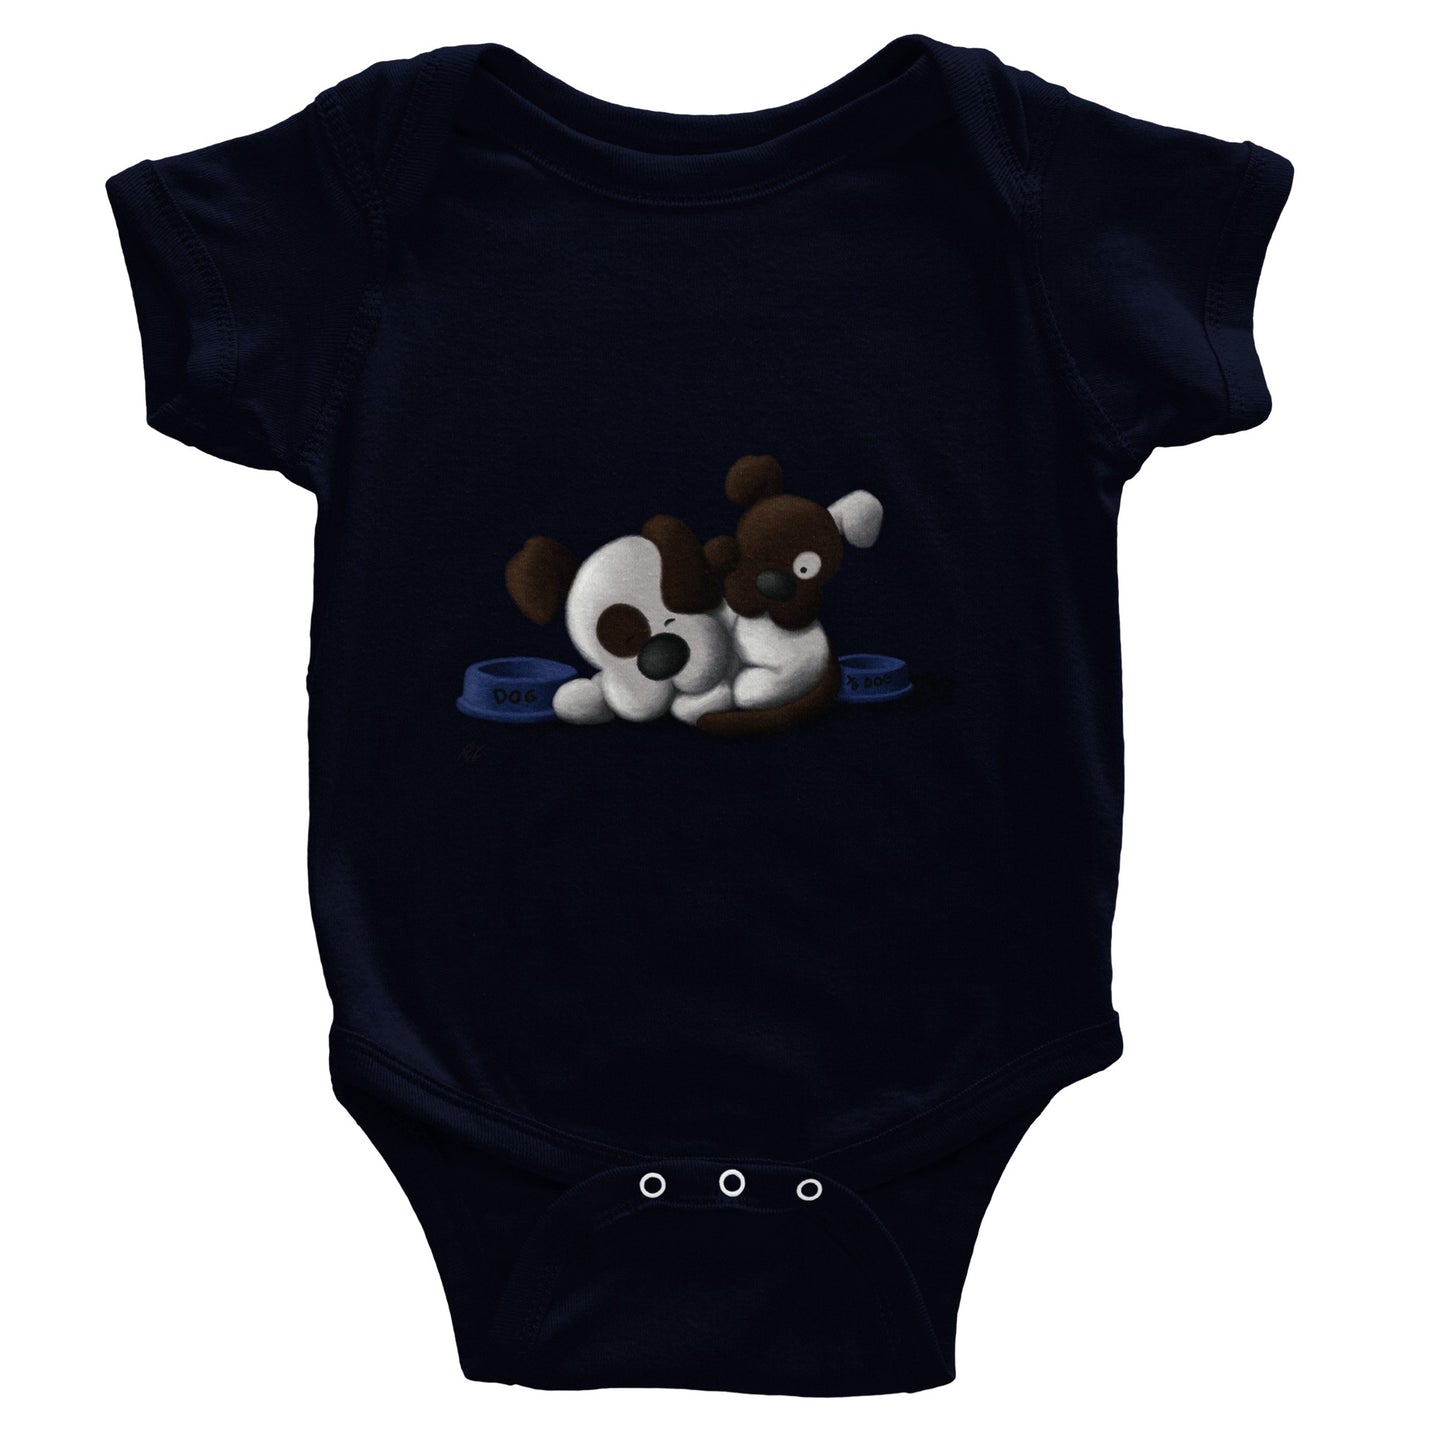 "Wake up Dad, it's time for Dinner!" - Classic Baby Short Sleeve Bodysuit